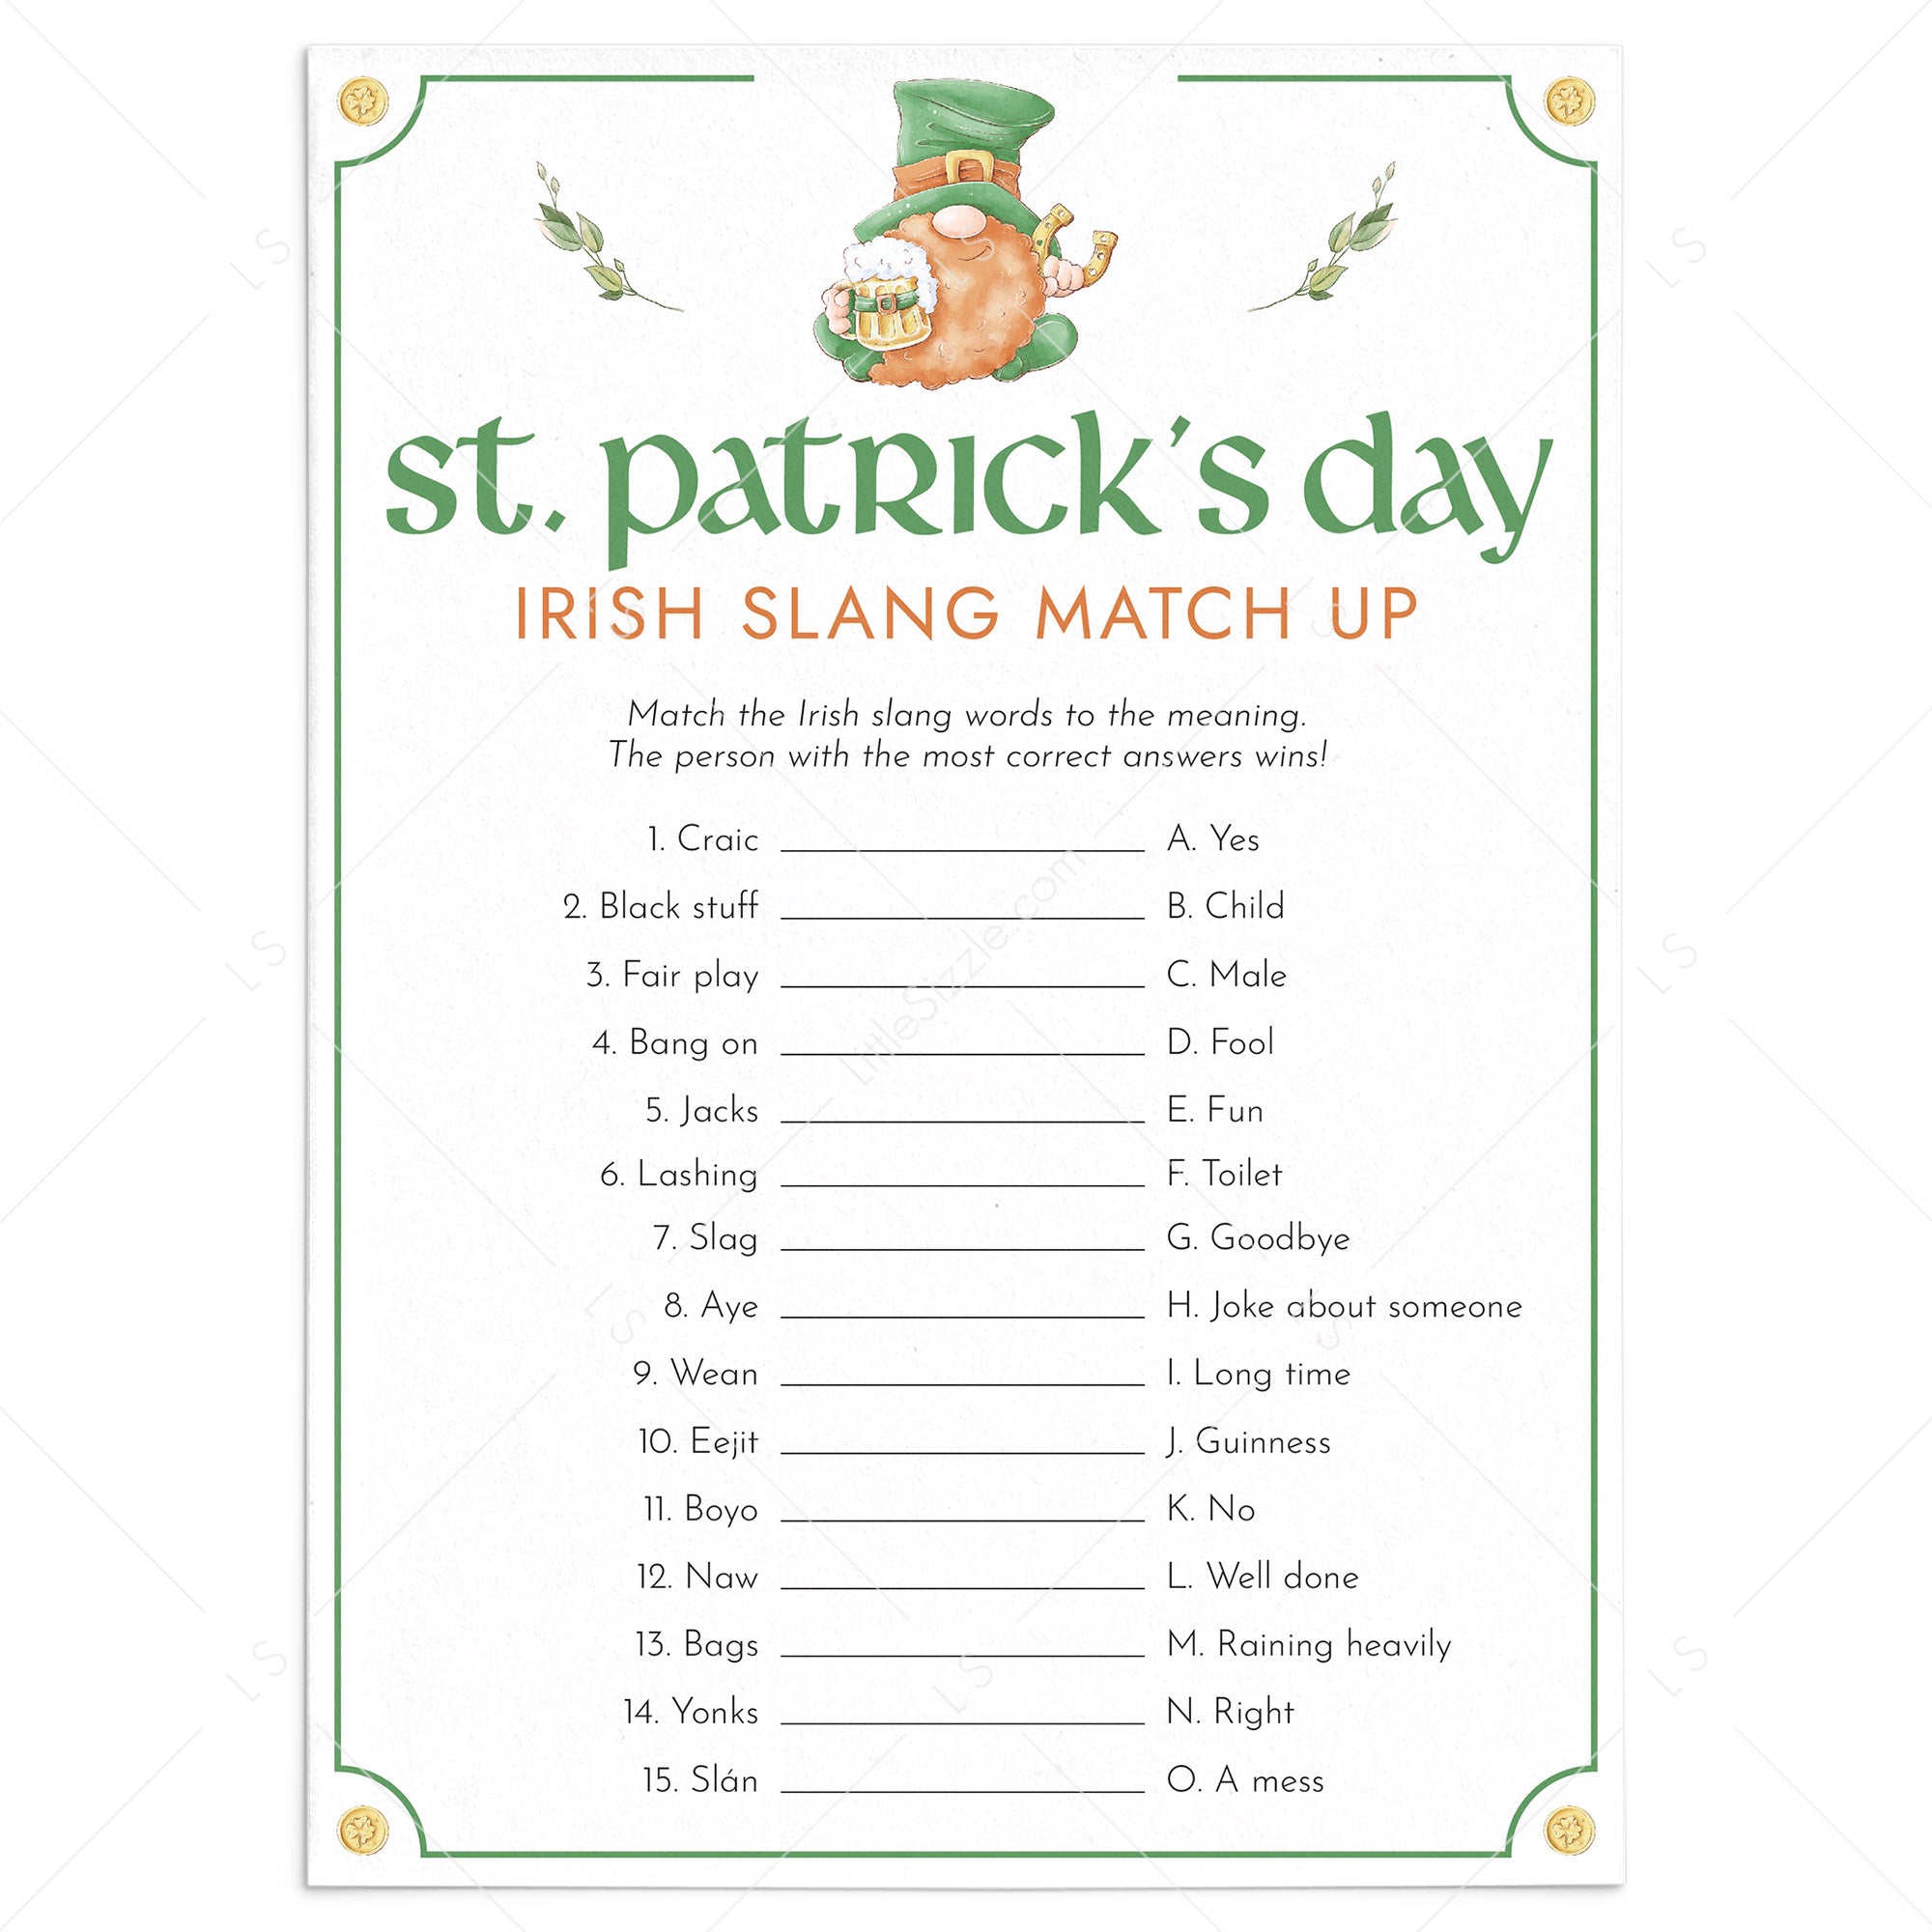 St Patrick's Party Game Irish Slang Match Up Printable by LittleSizzle